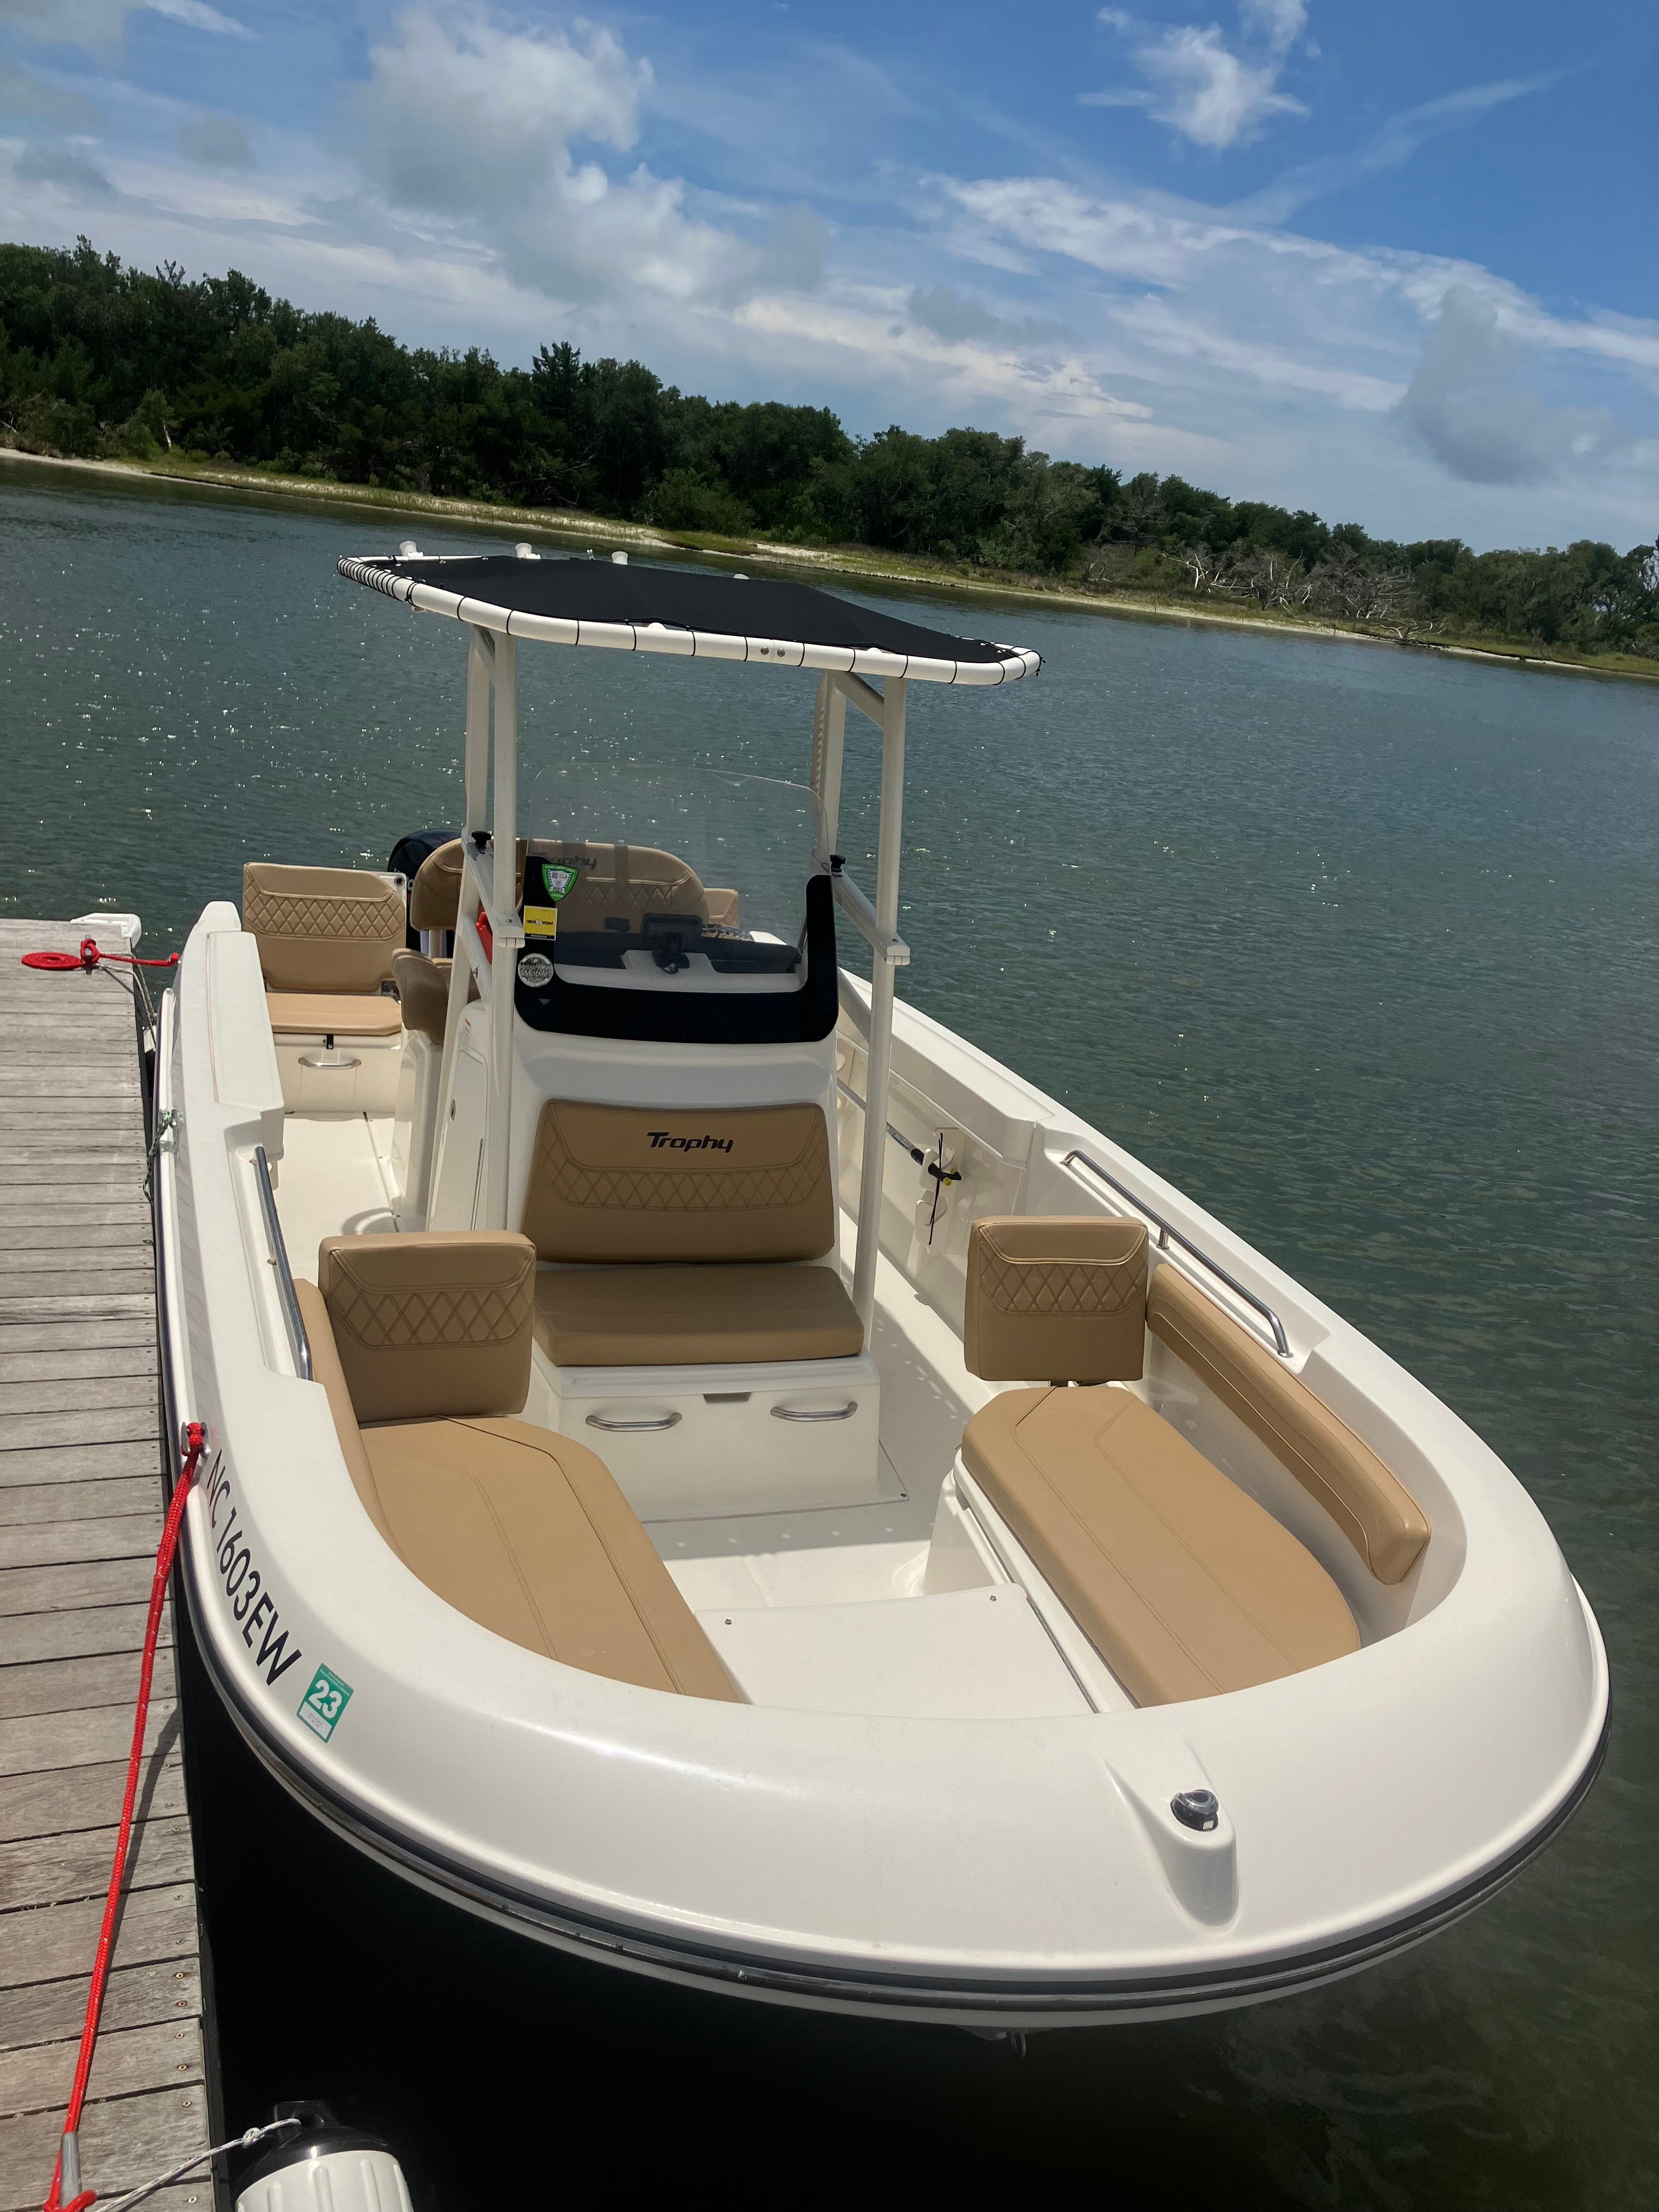 HARD KNOT LIFE (22FT Bayliner Trophy 22 Center Console - 150 HP~Fishing)